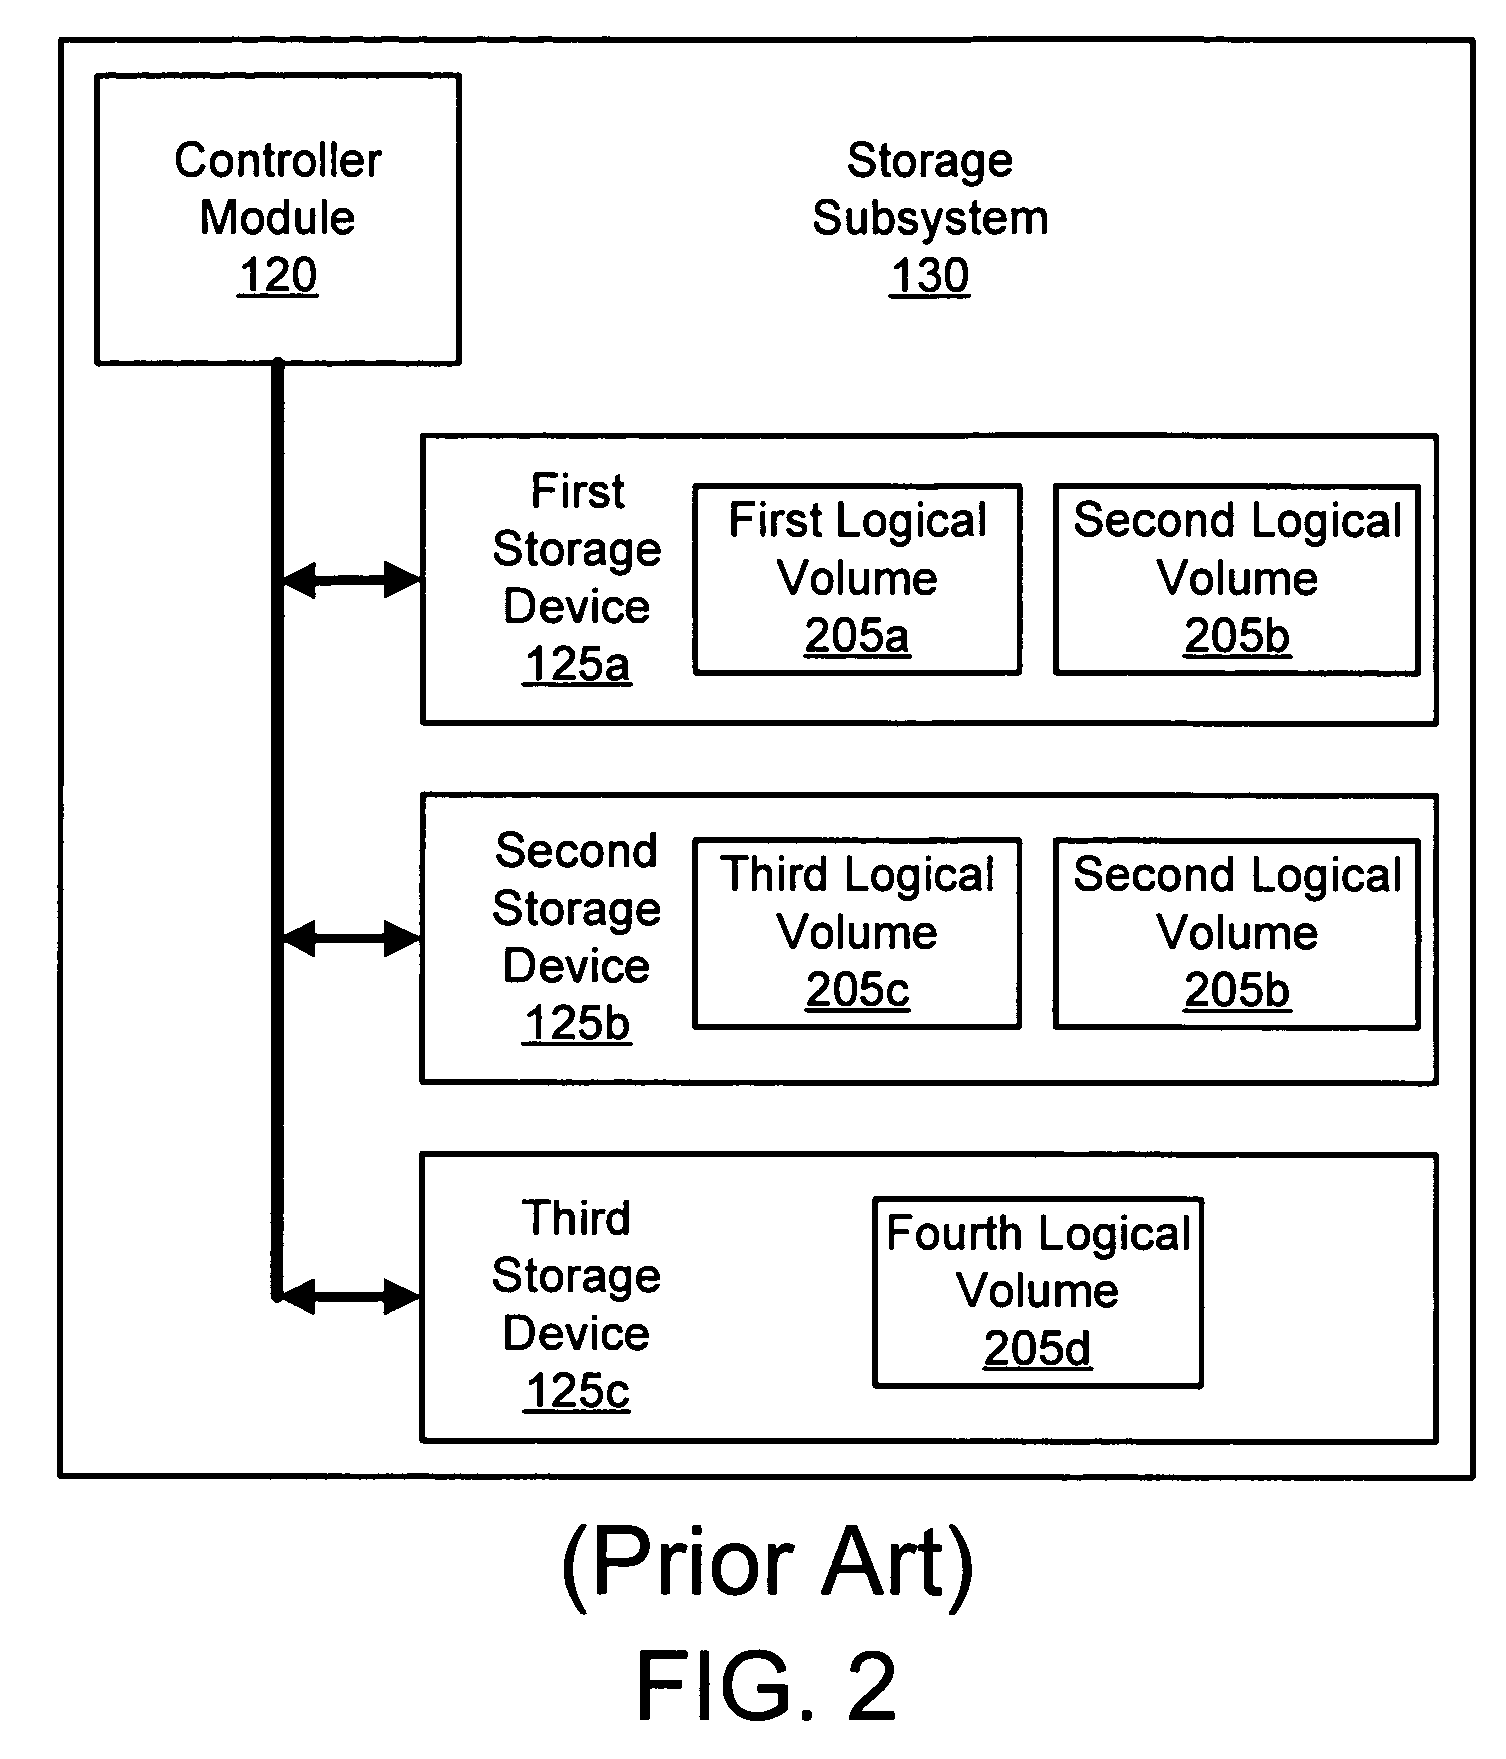 Apparatus, system, and method for validating logical volume configuration